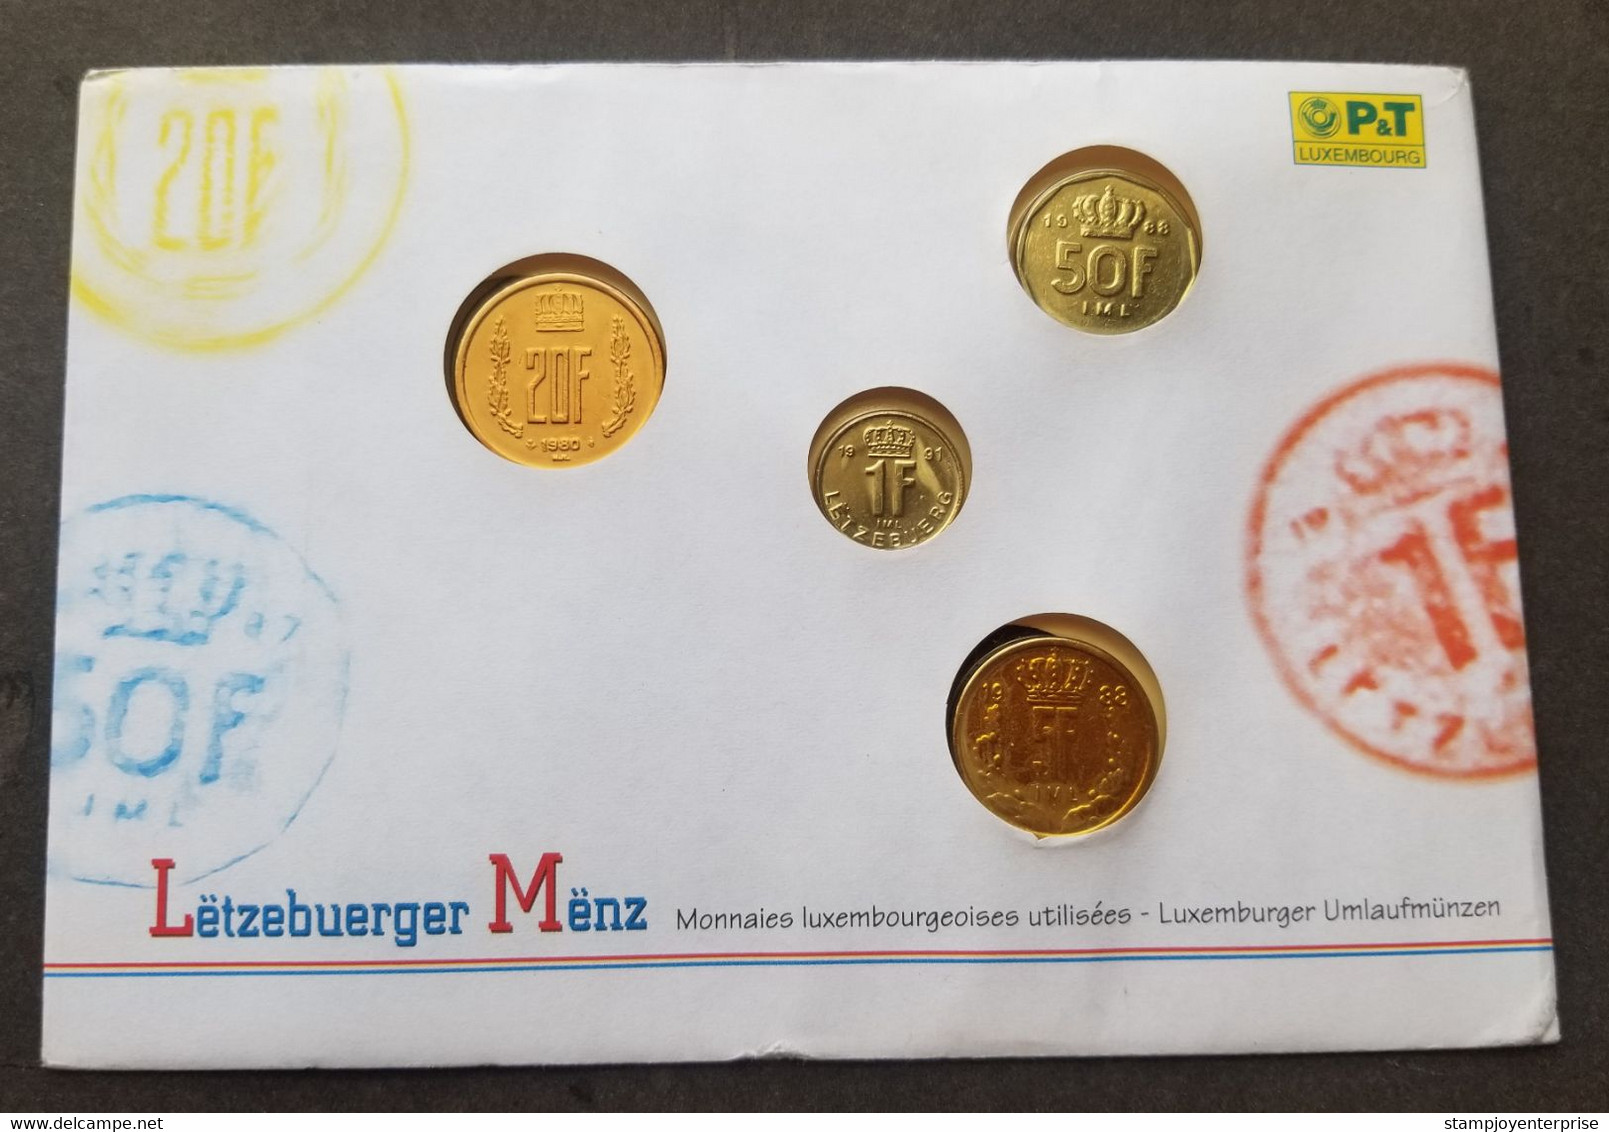 Luxembourg Currency Money 1991 (coin Cover) *see Scan - Briefe U. Dokumente